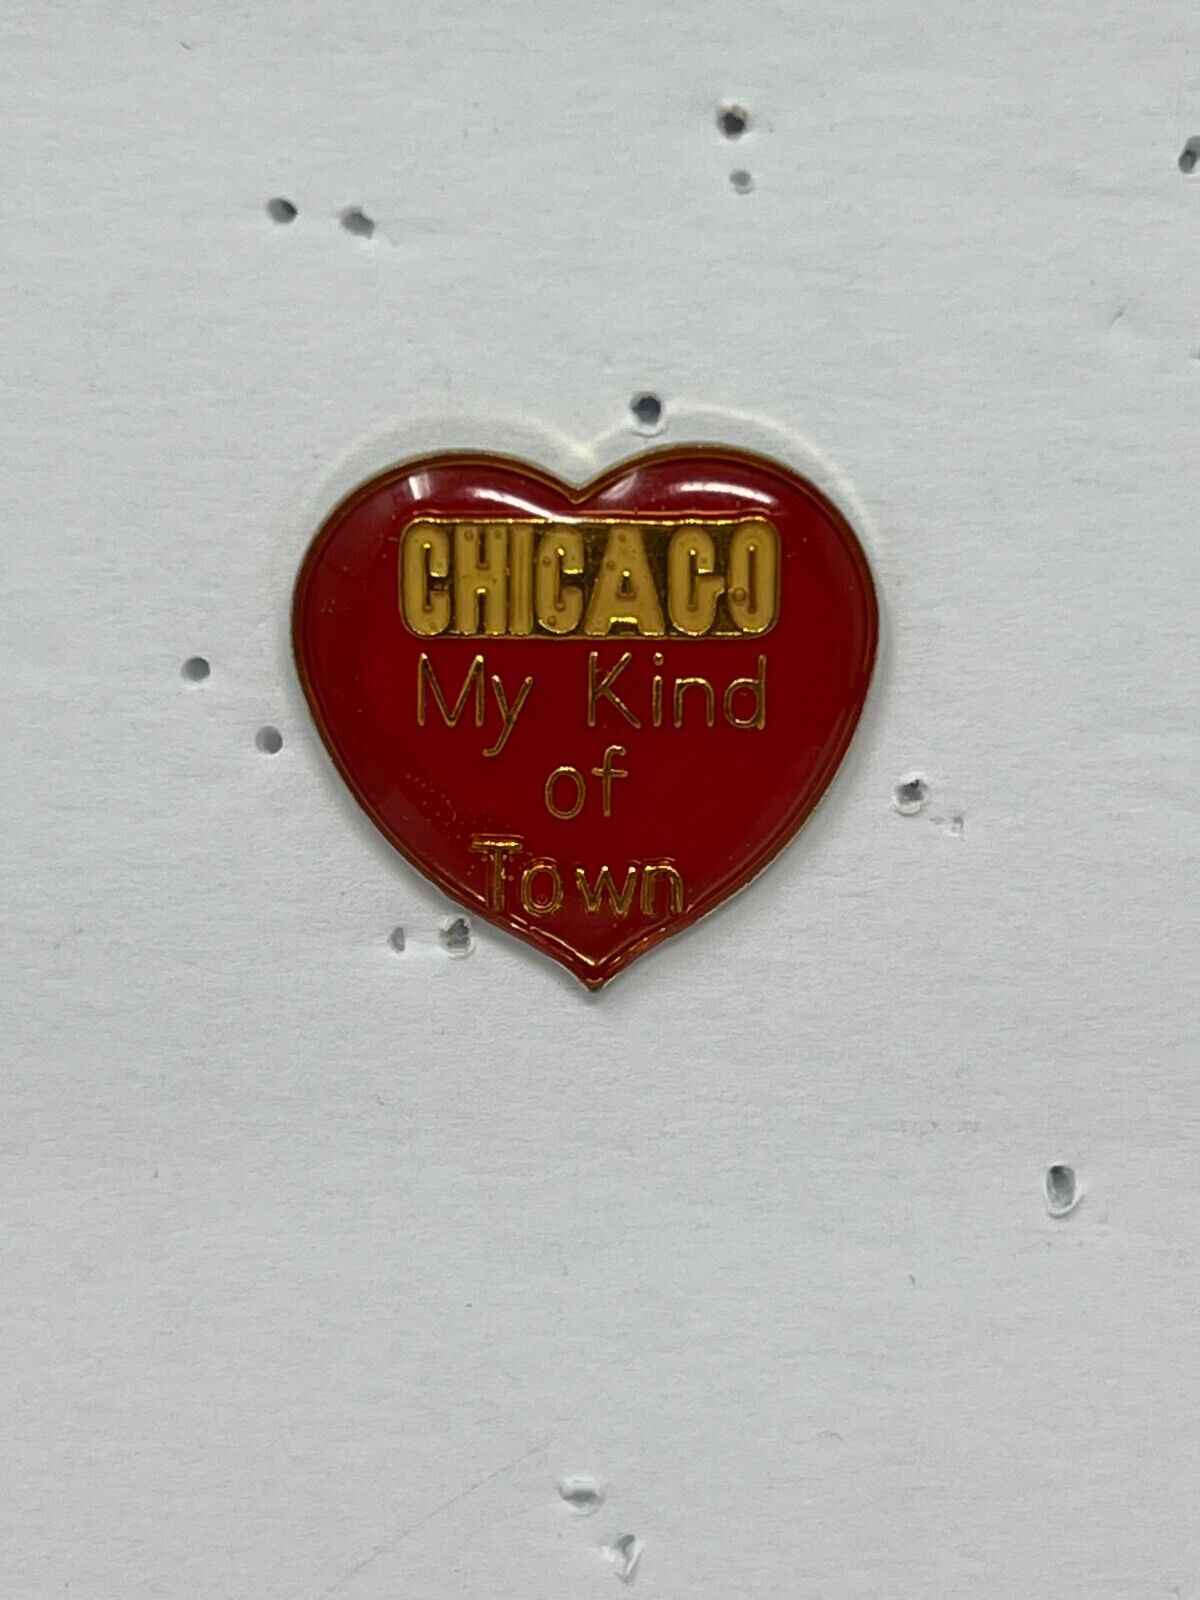 Chicago My Kind of Town Heart Souvenir Cities & States Lapel Pin P1